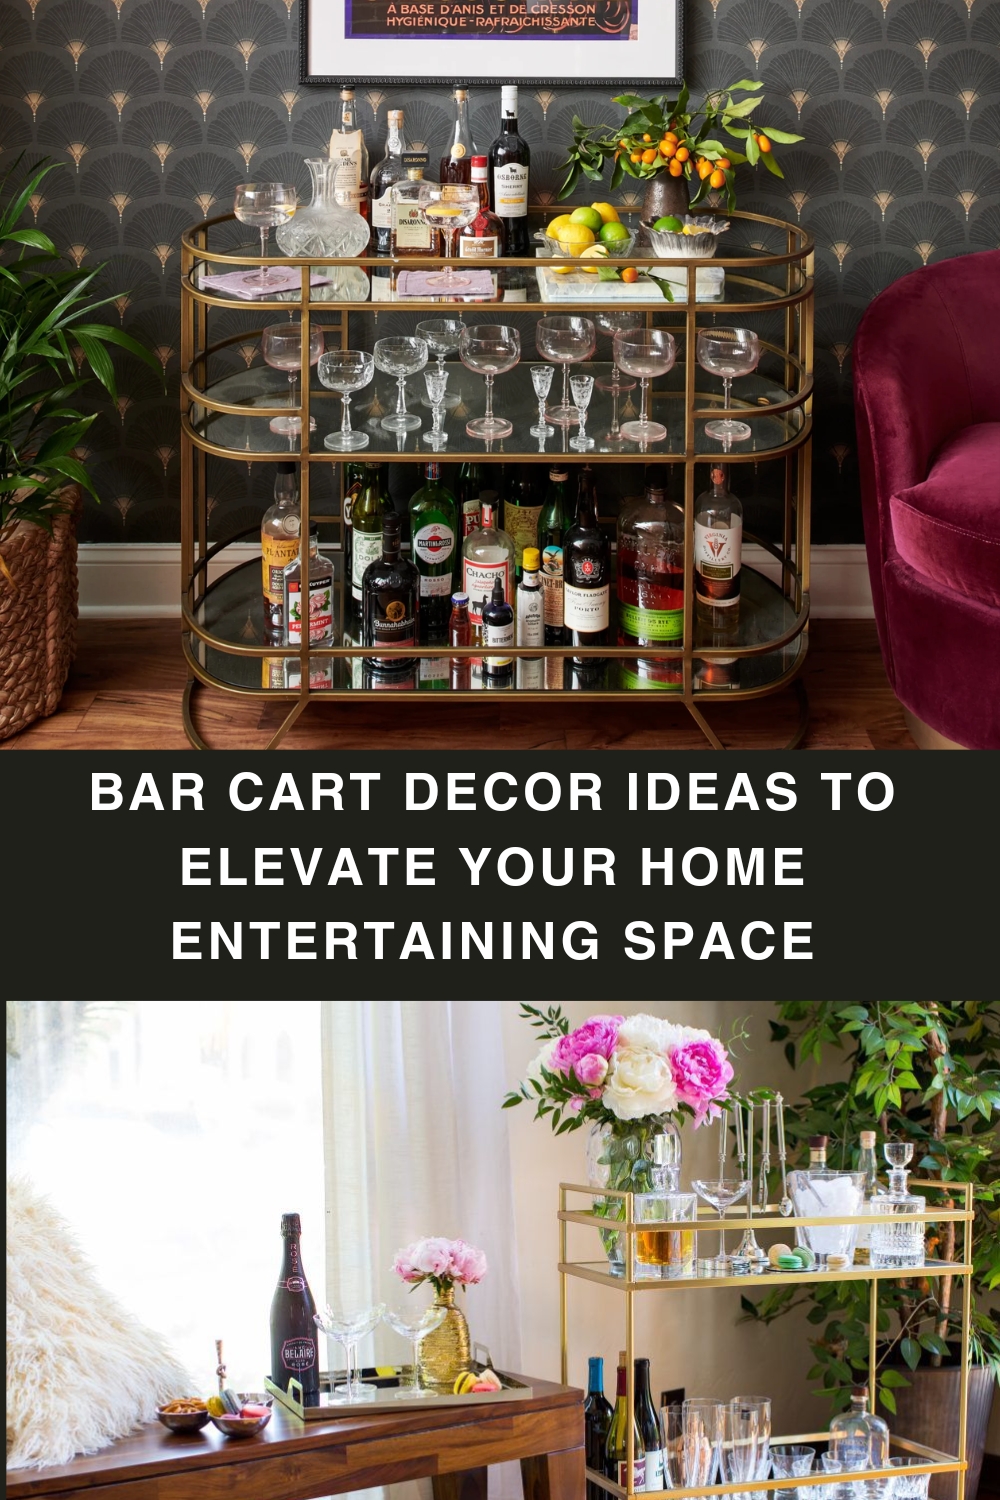 Bar Cart Decor Ideas to Elevate Your Home Entertaining Space pin